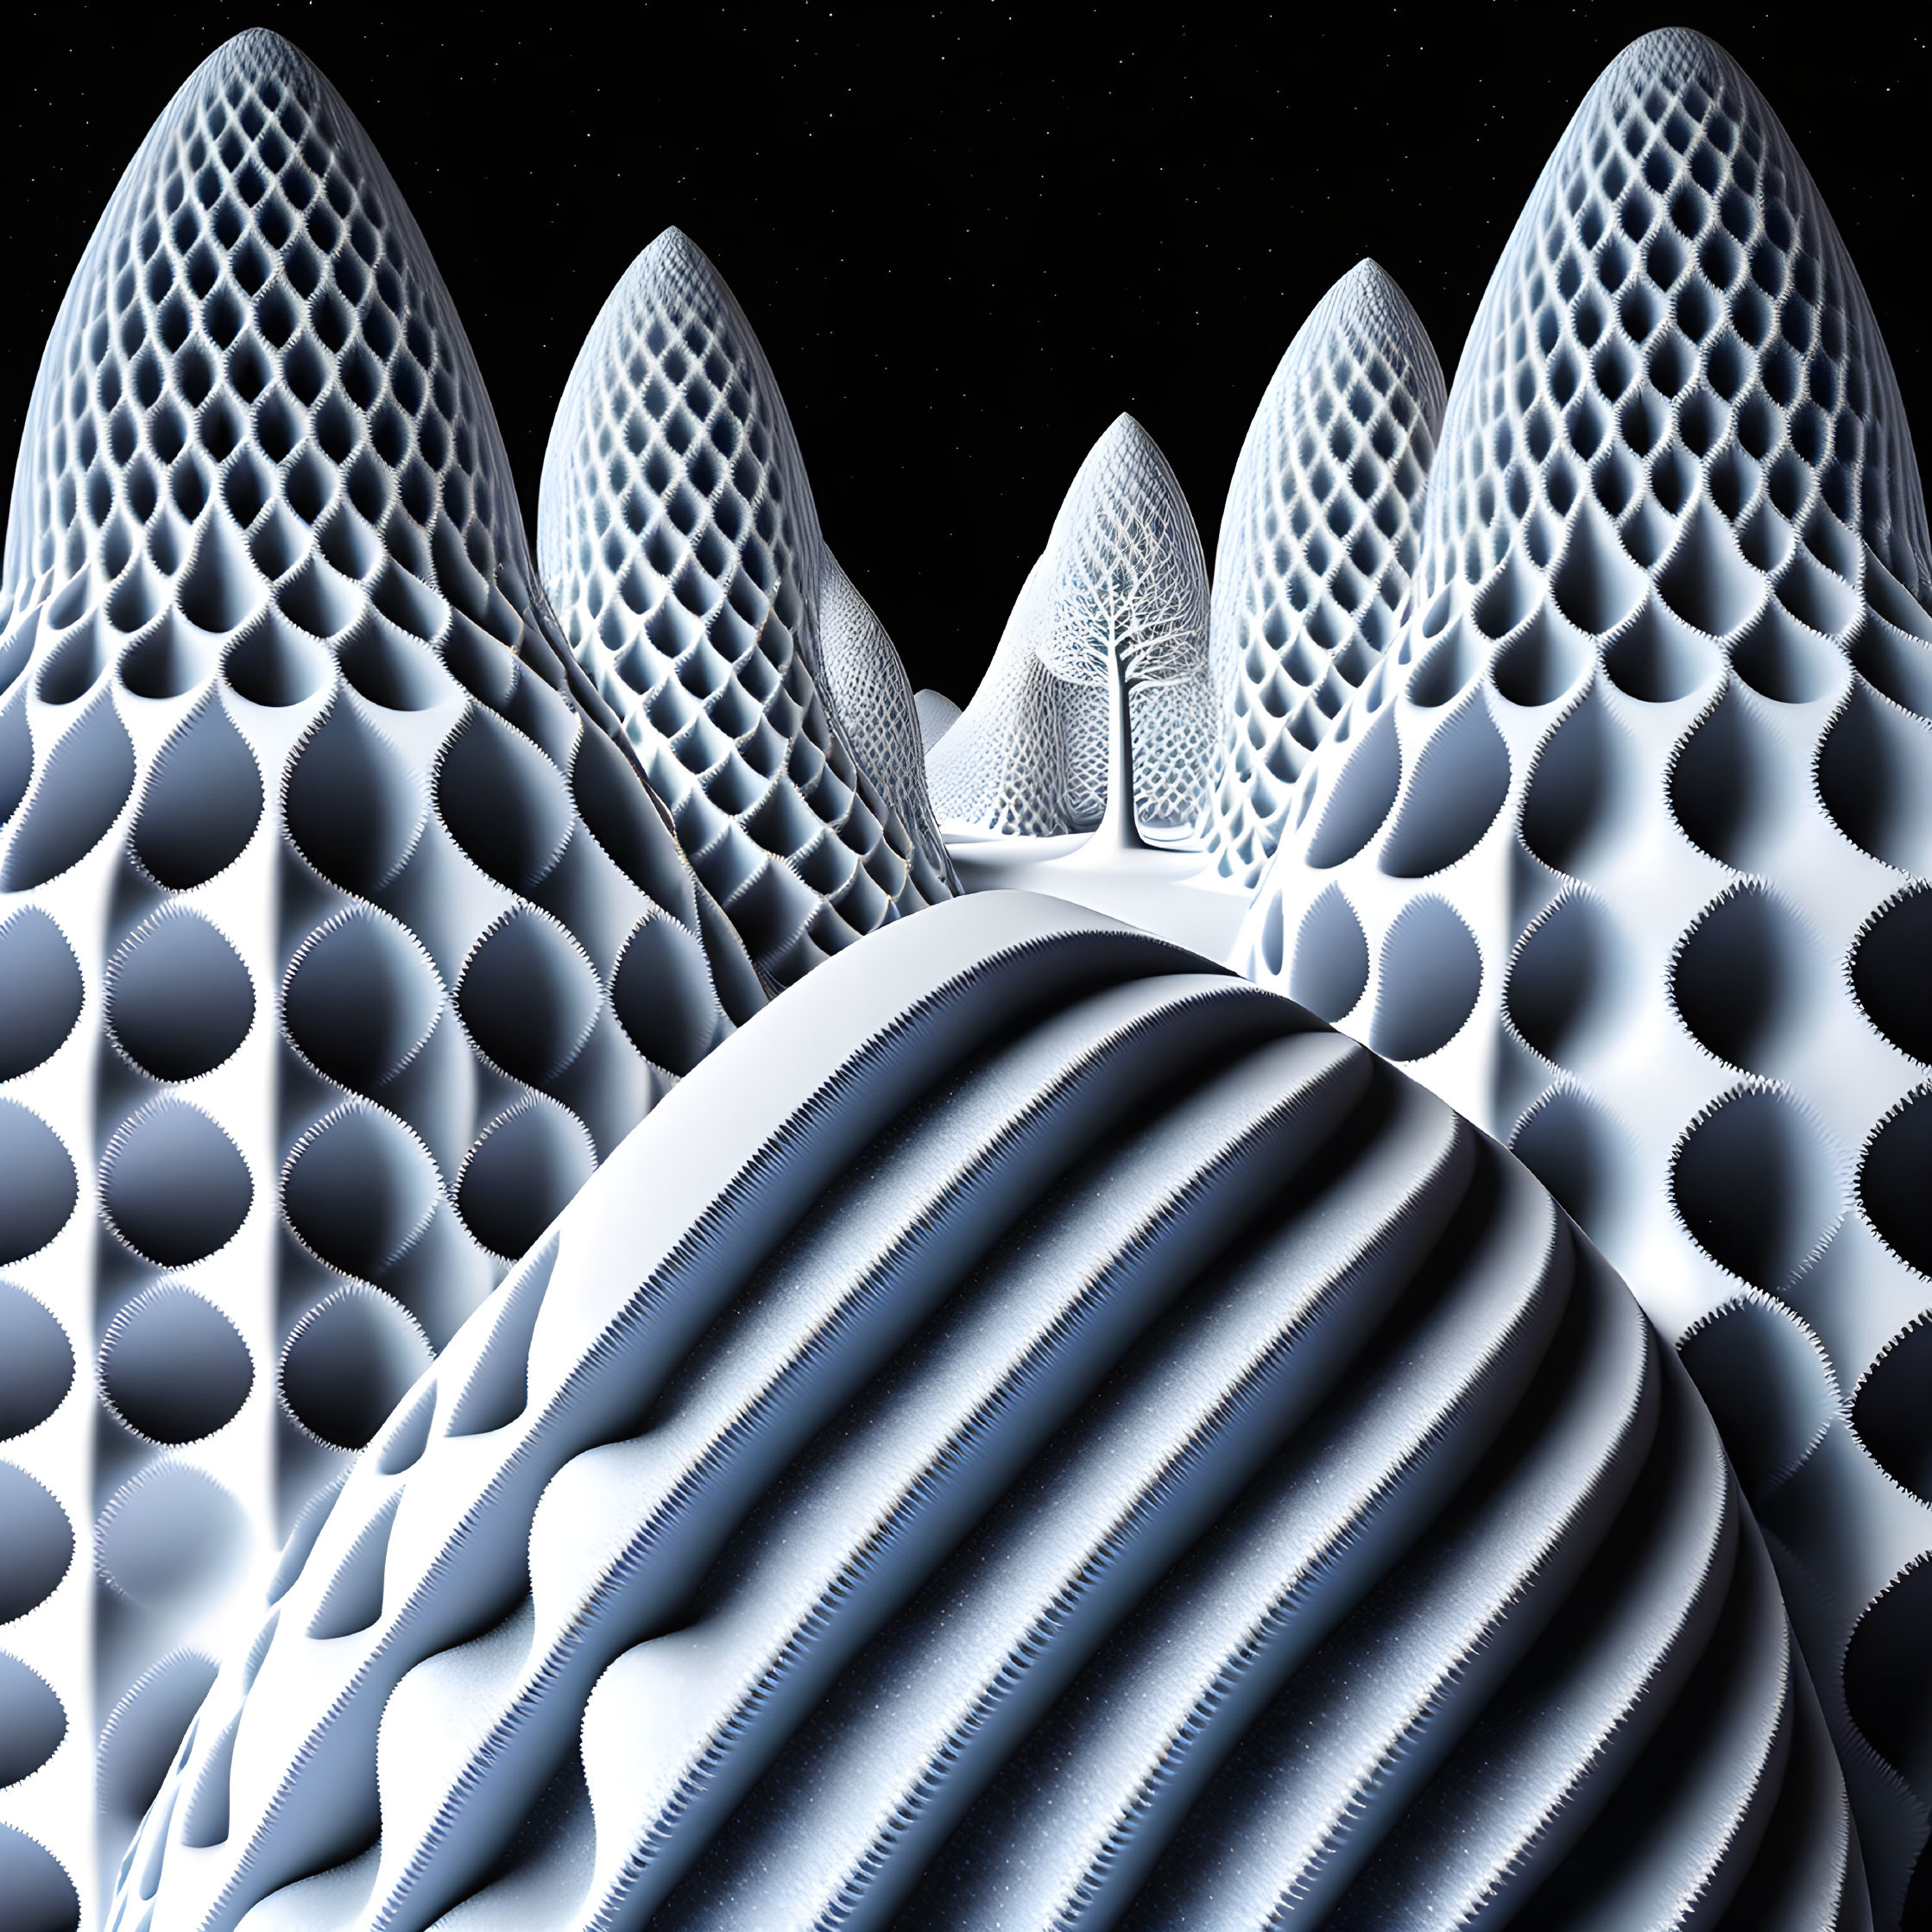 Symmetrical Cone-Like Structures in Abstract 3D Landscape